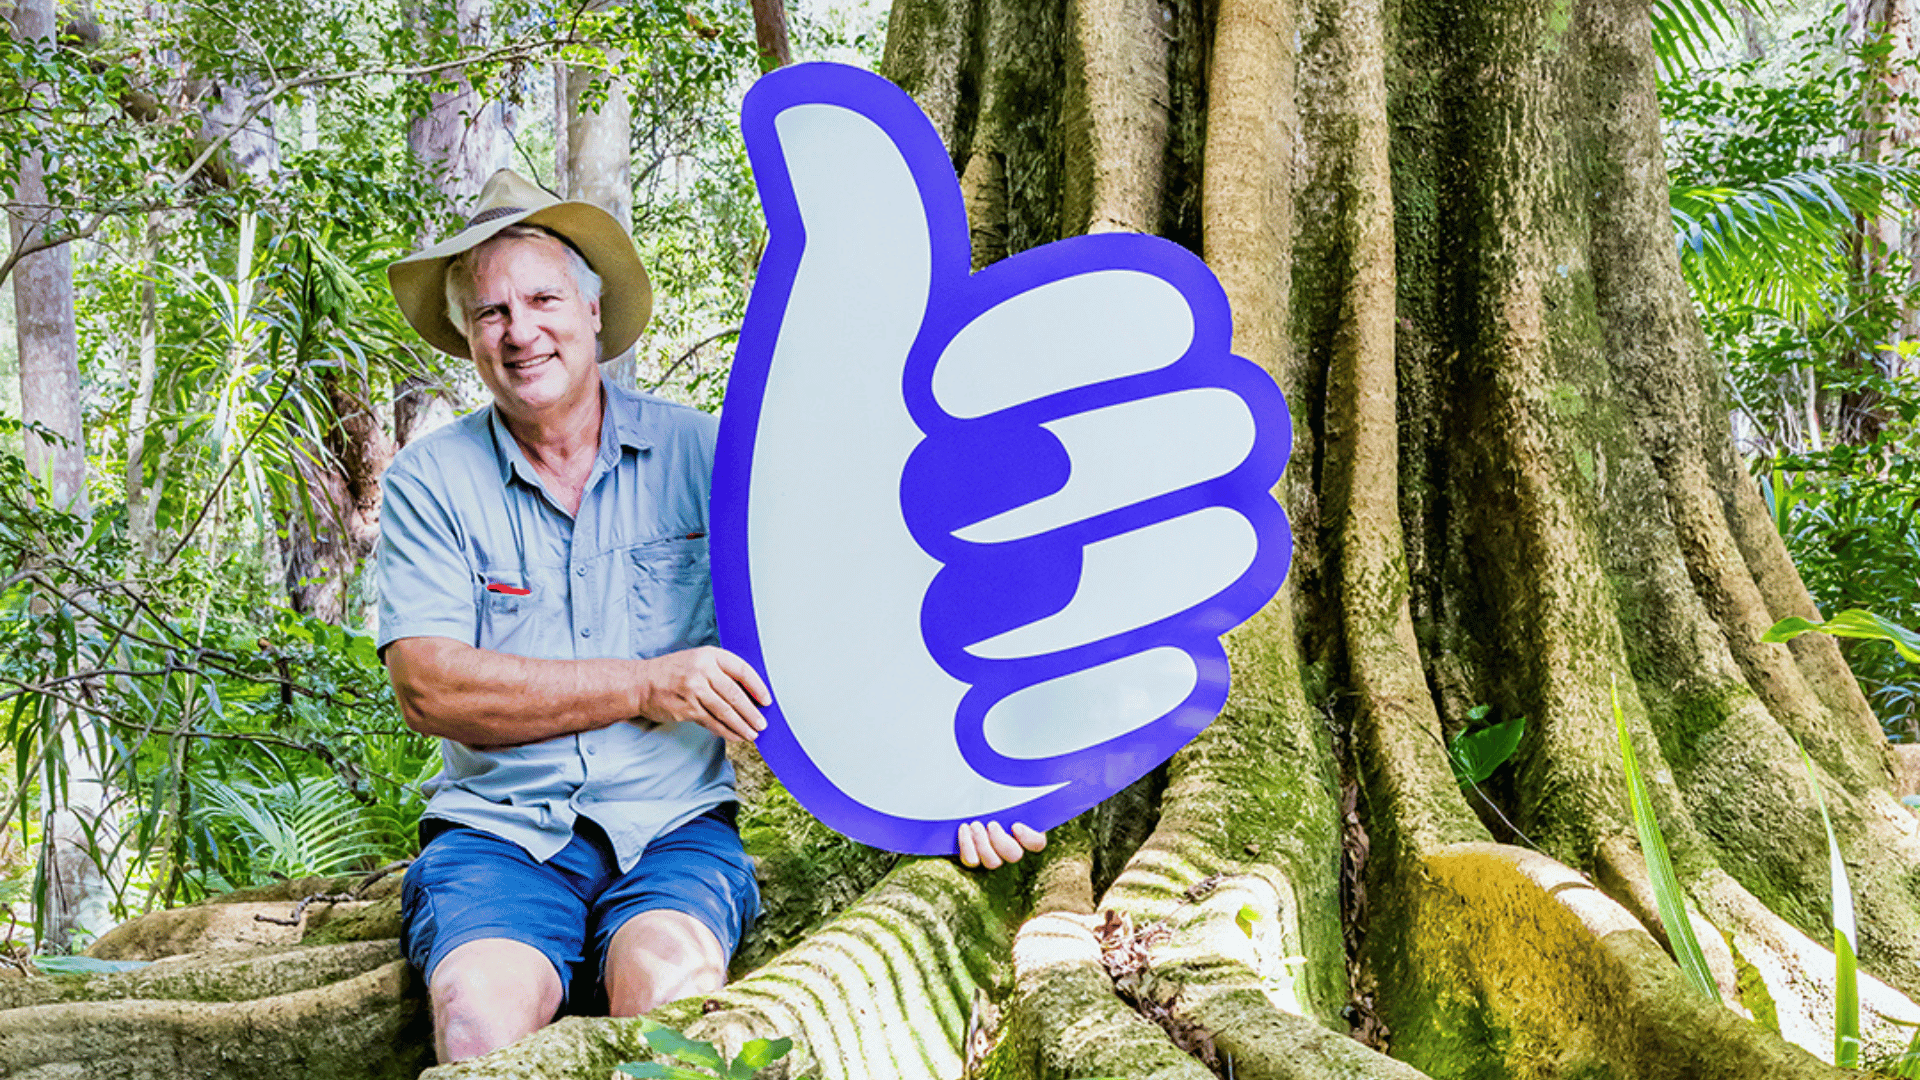 Man holding a Bonza thumb in front of tree at the Coffs Harbour Botanic Gardens.